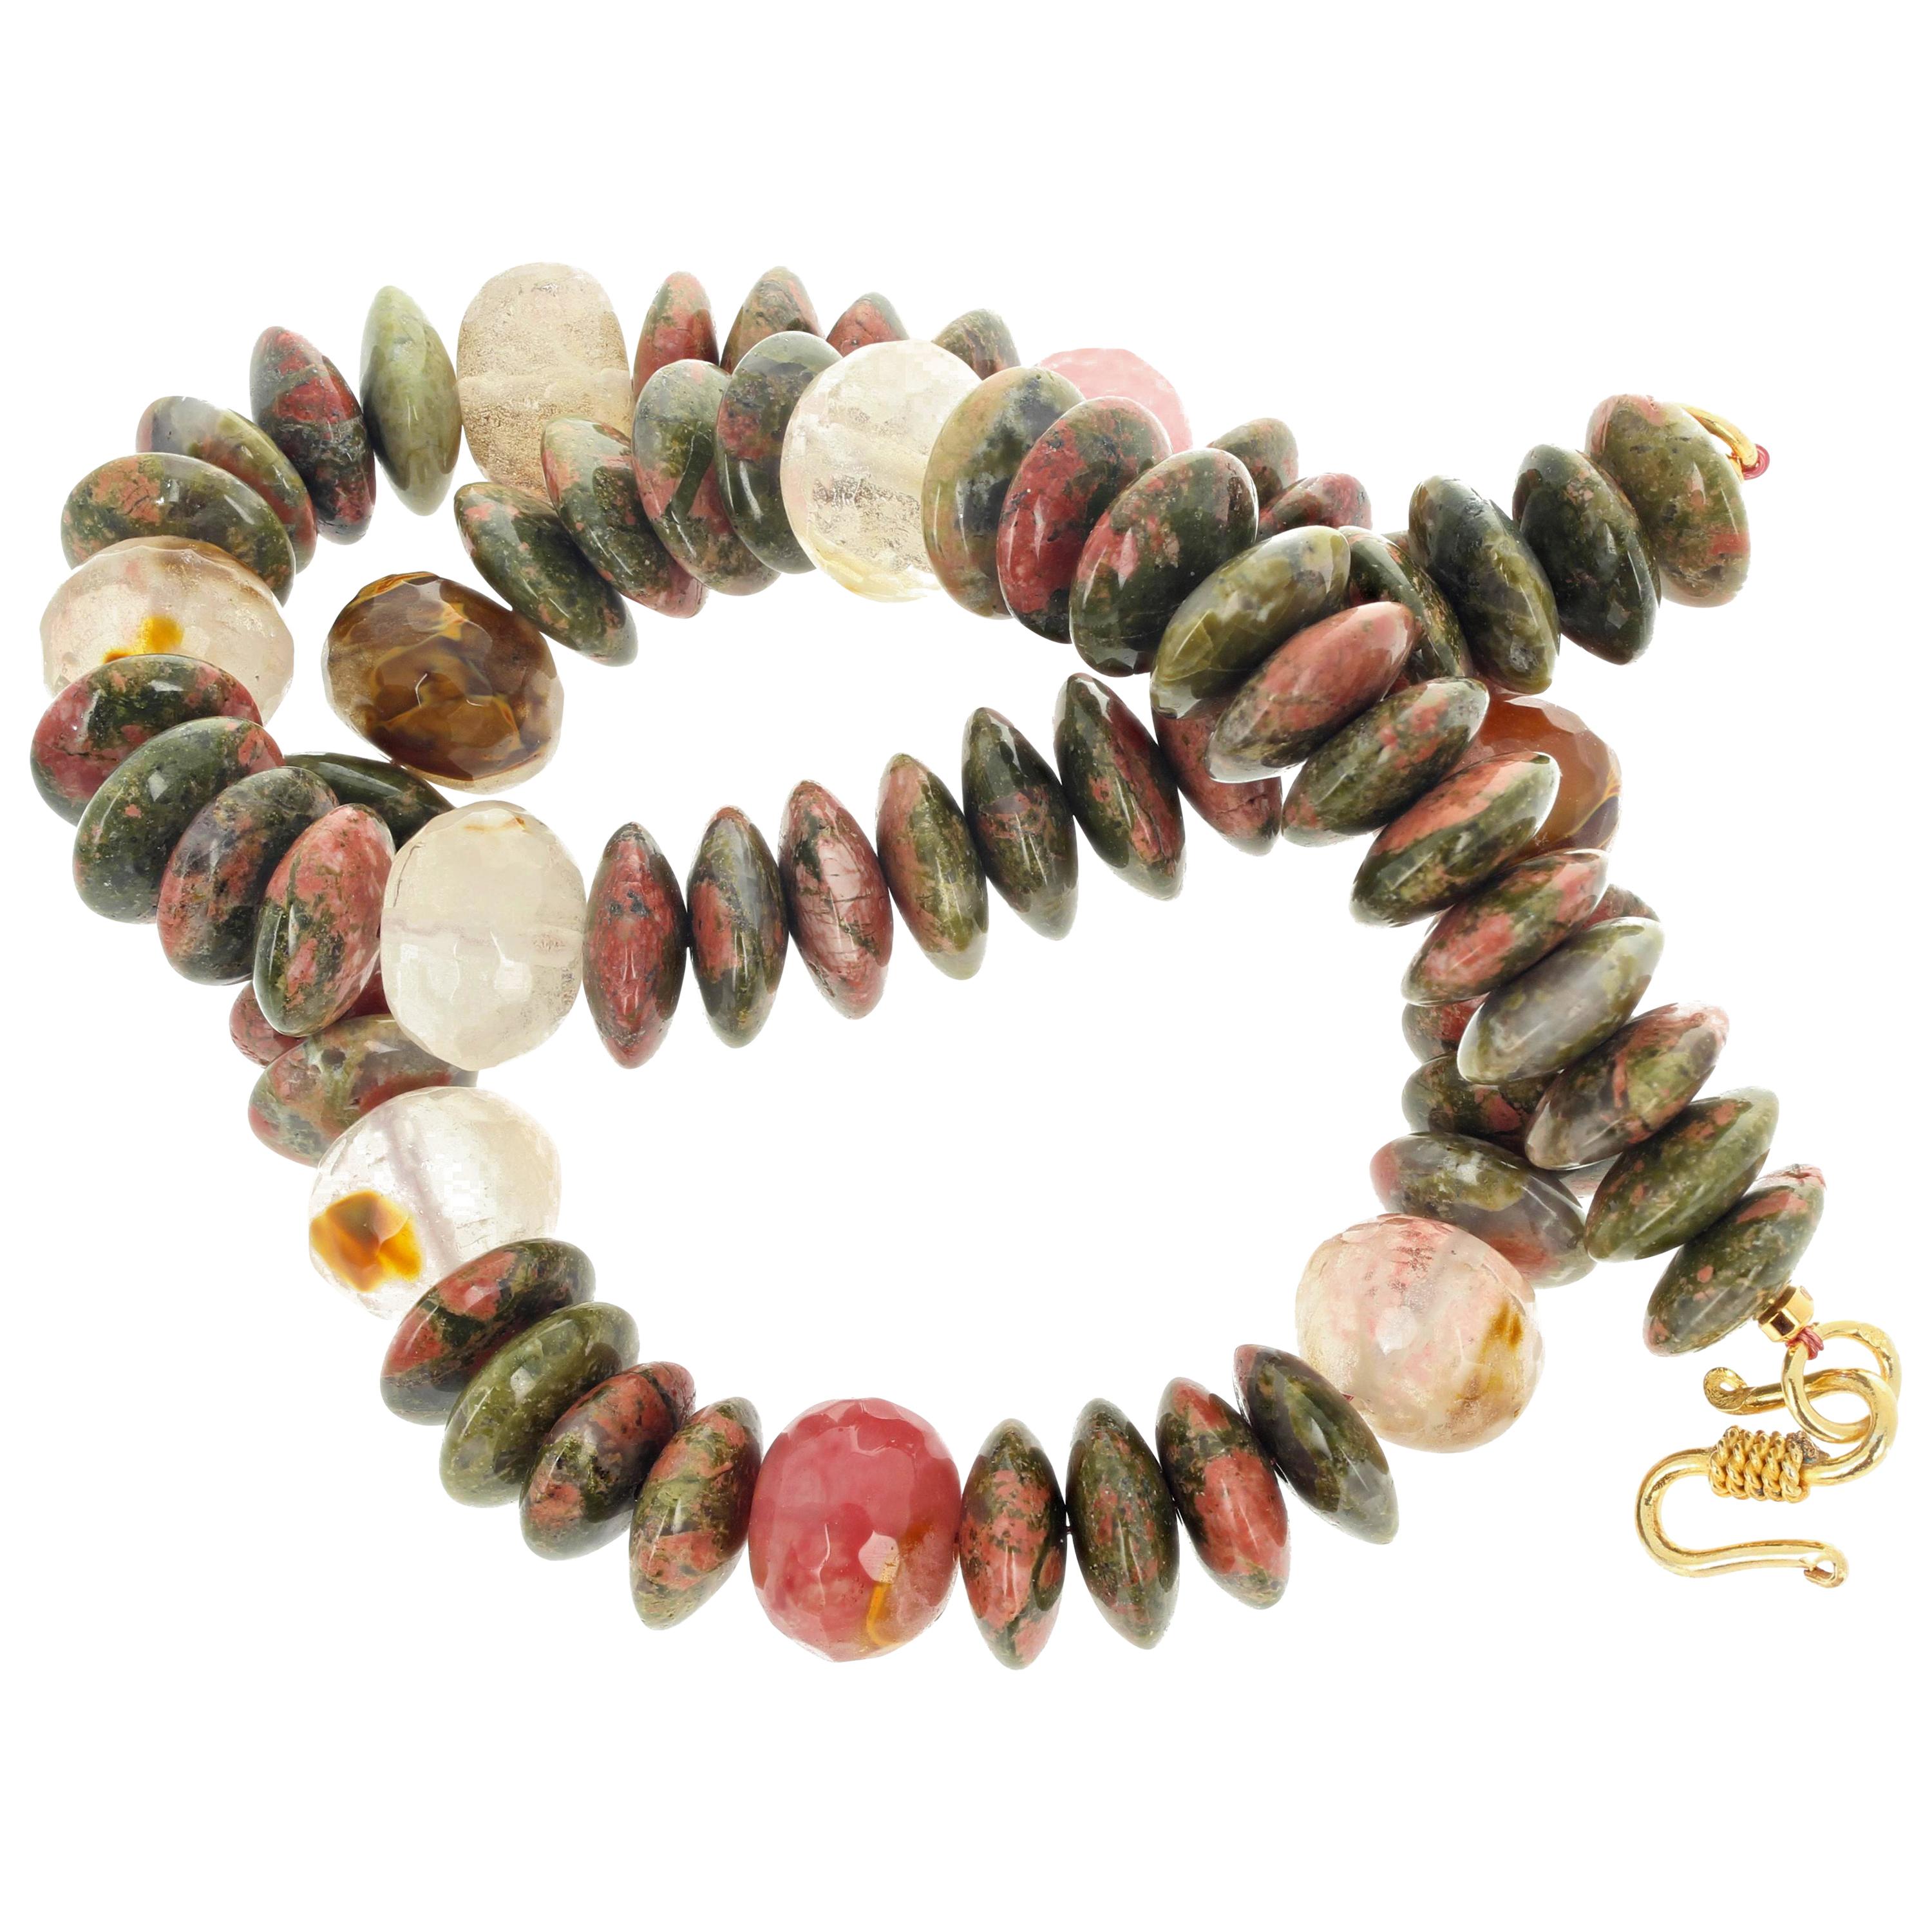 Gemjunky Beautiful 20.5" Natural Jasper and Agate and Quartz Necklace